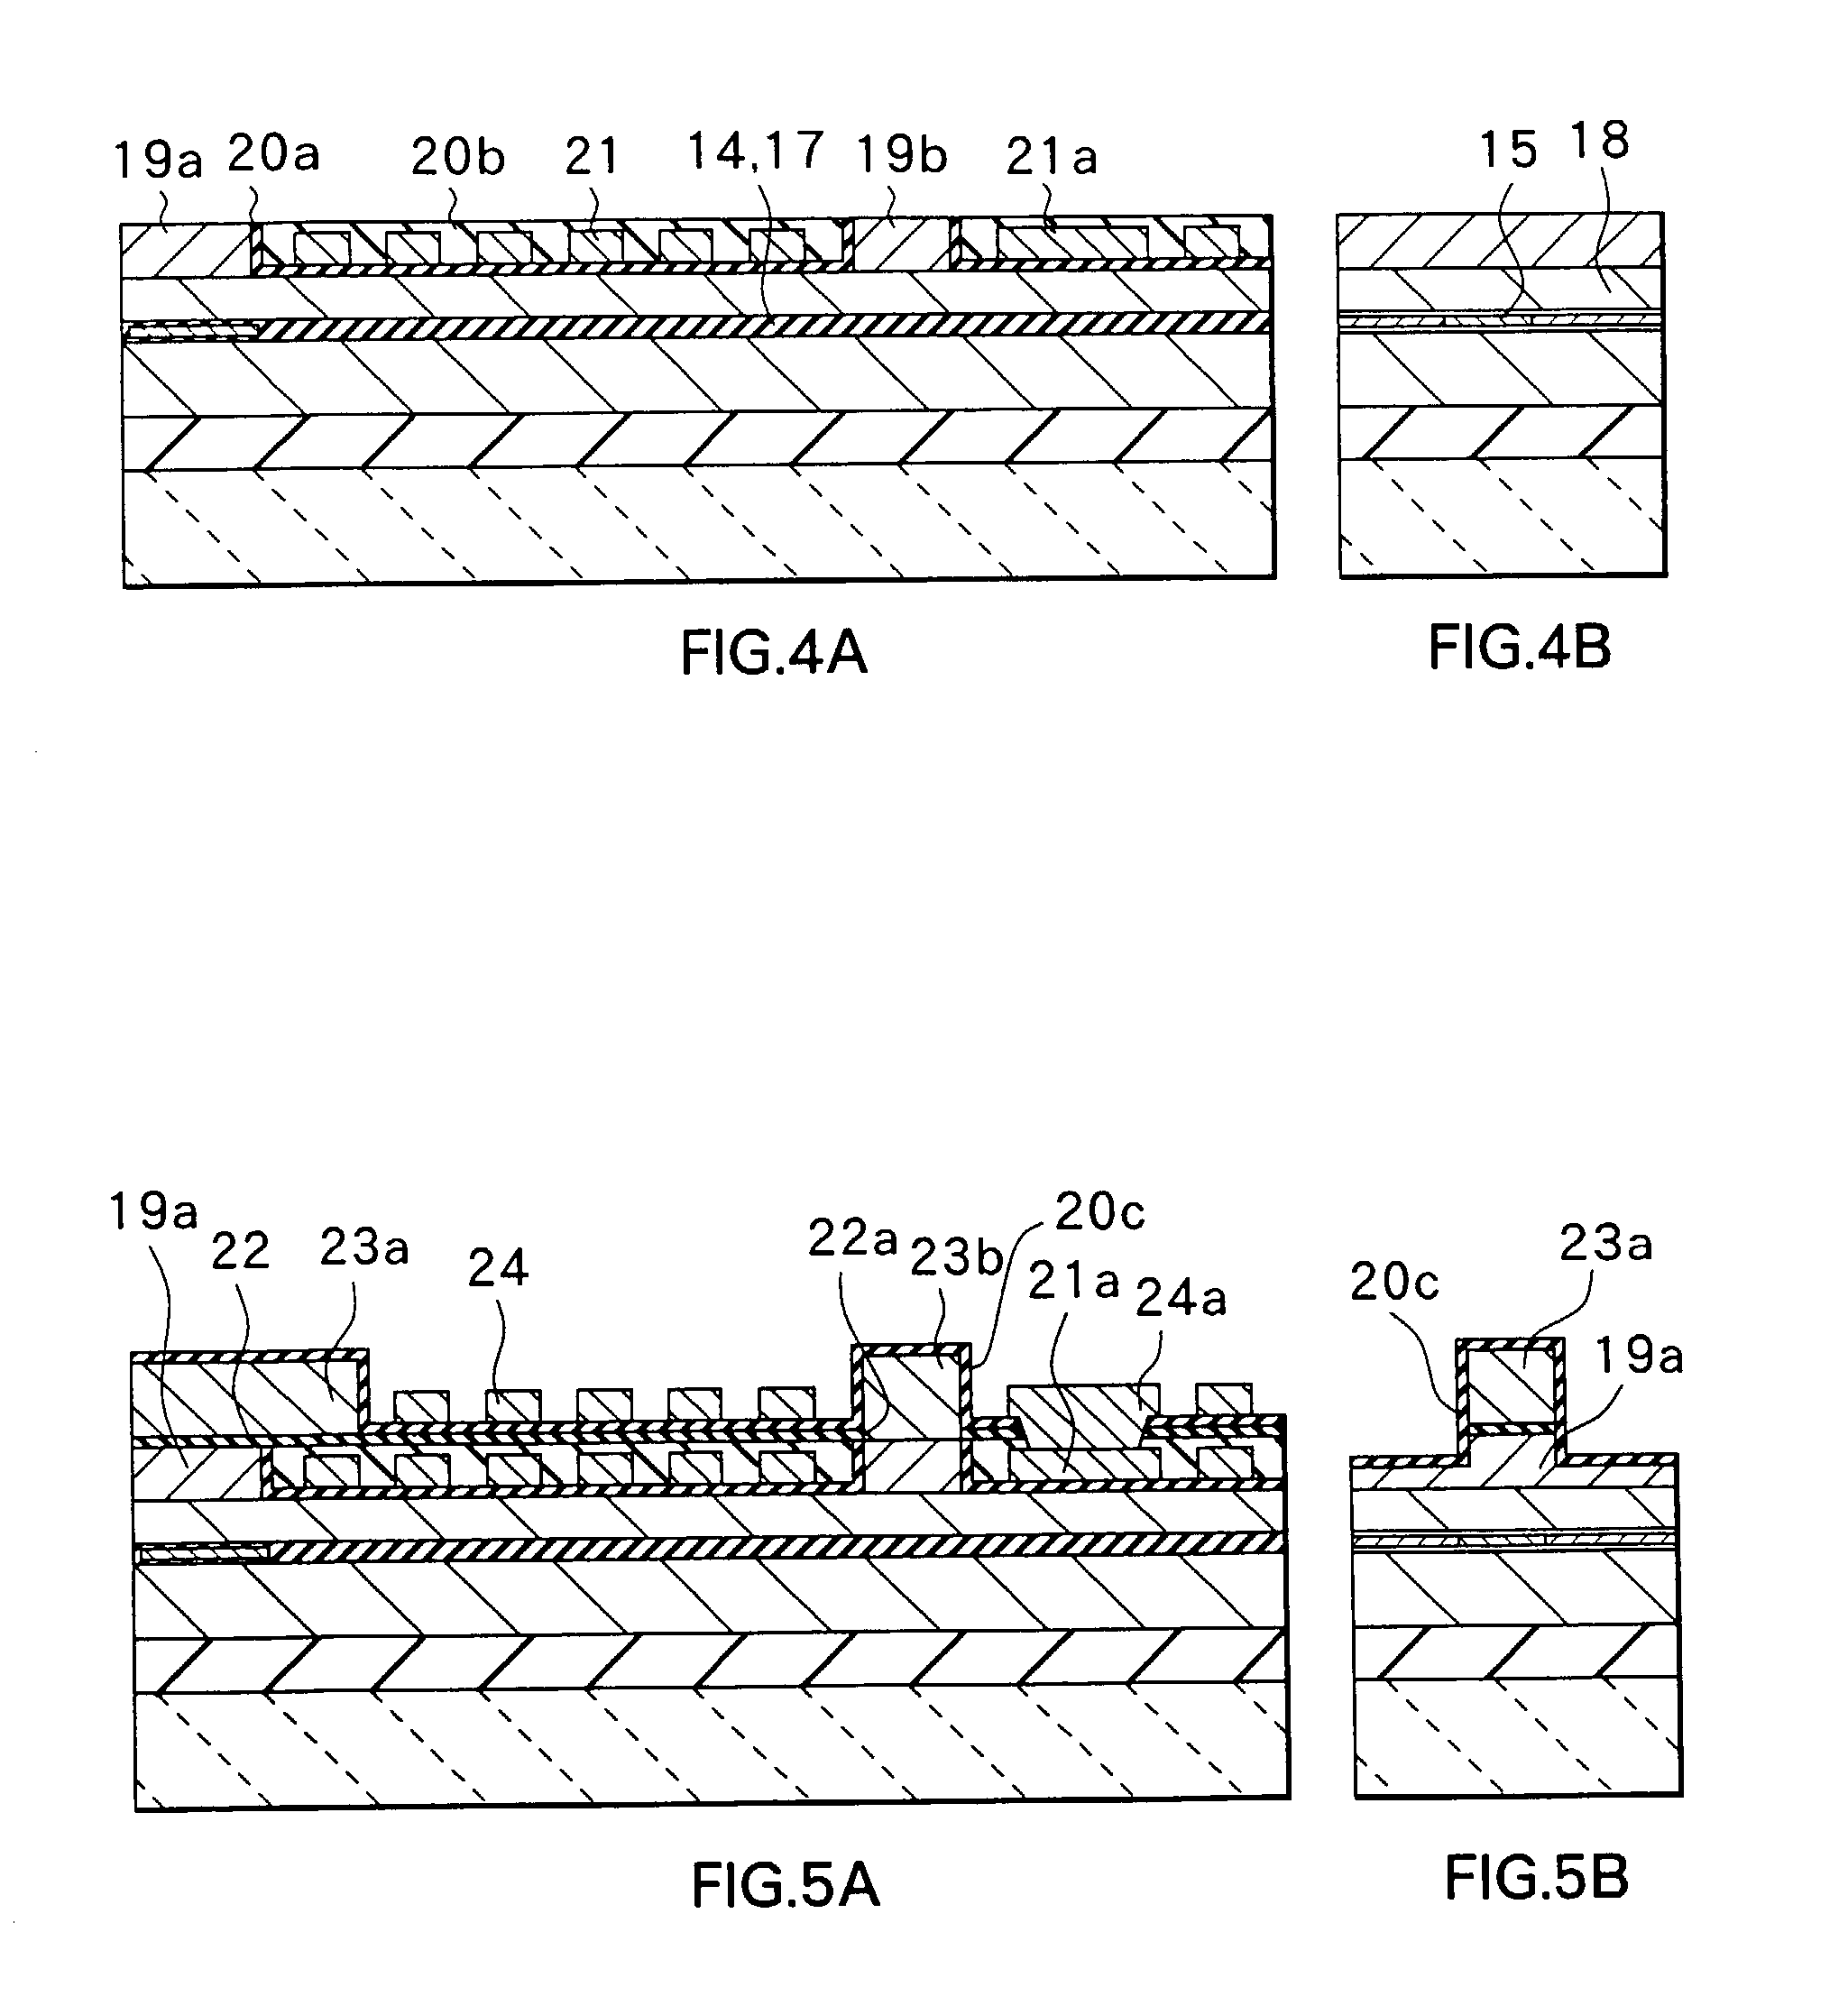 Thin film magnetic head and method of manufacturing same